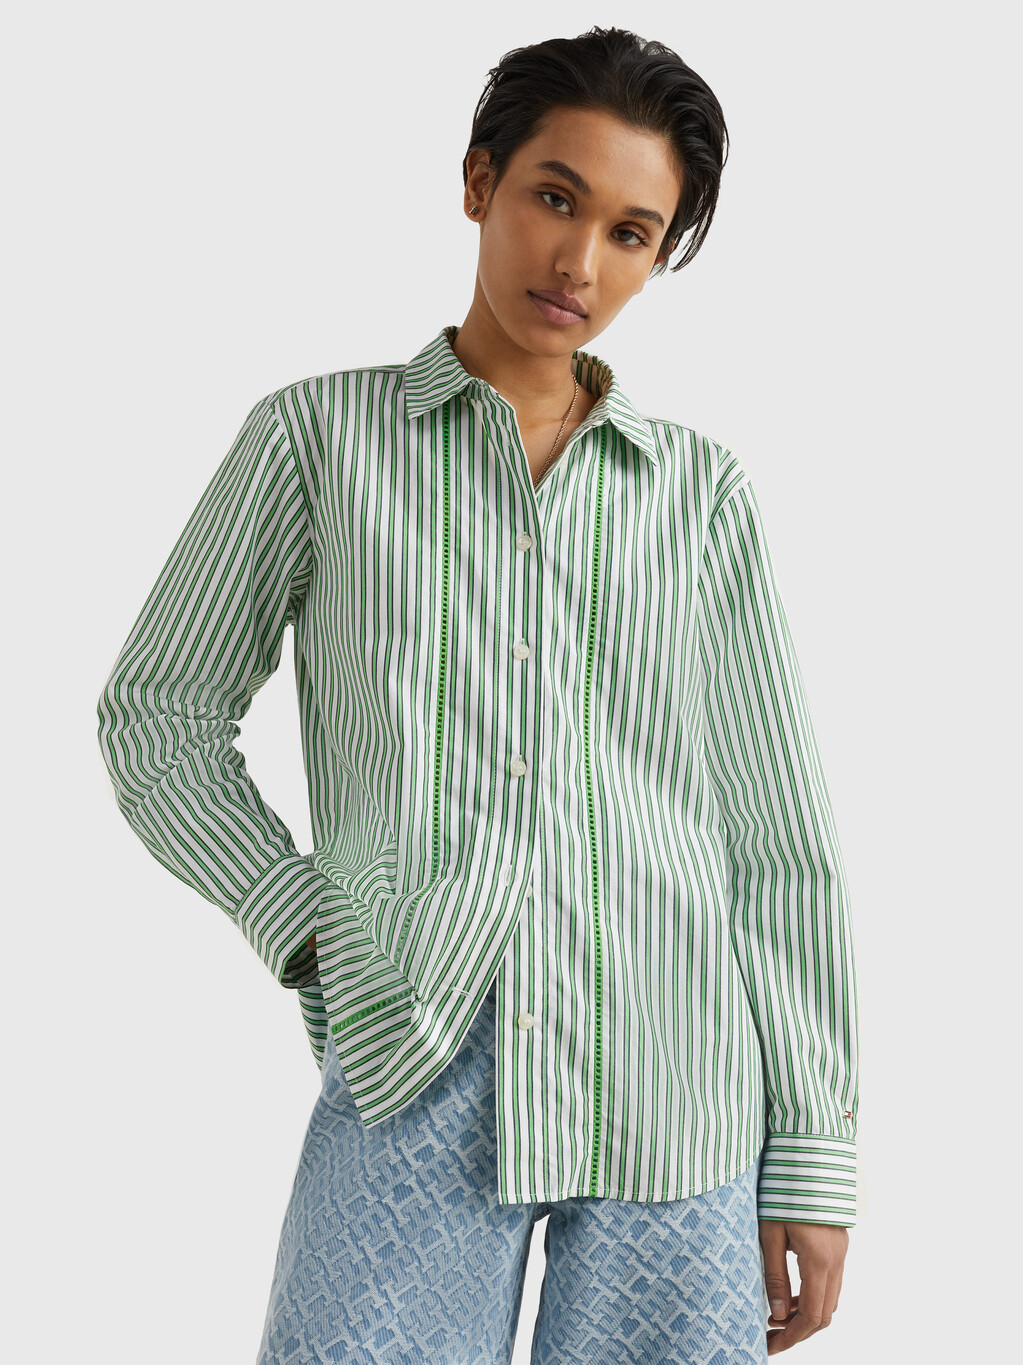 Stripe Relaxed Fit Shirt, Nola Stp/ Spring Lime, hi-res